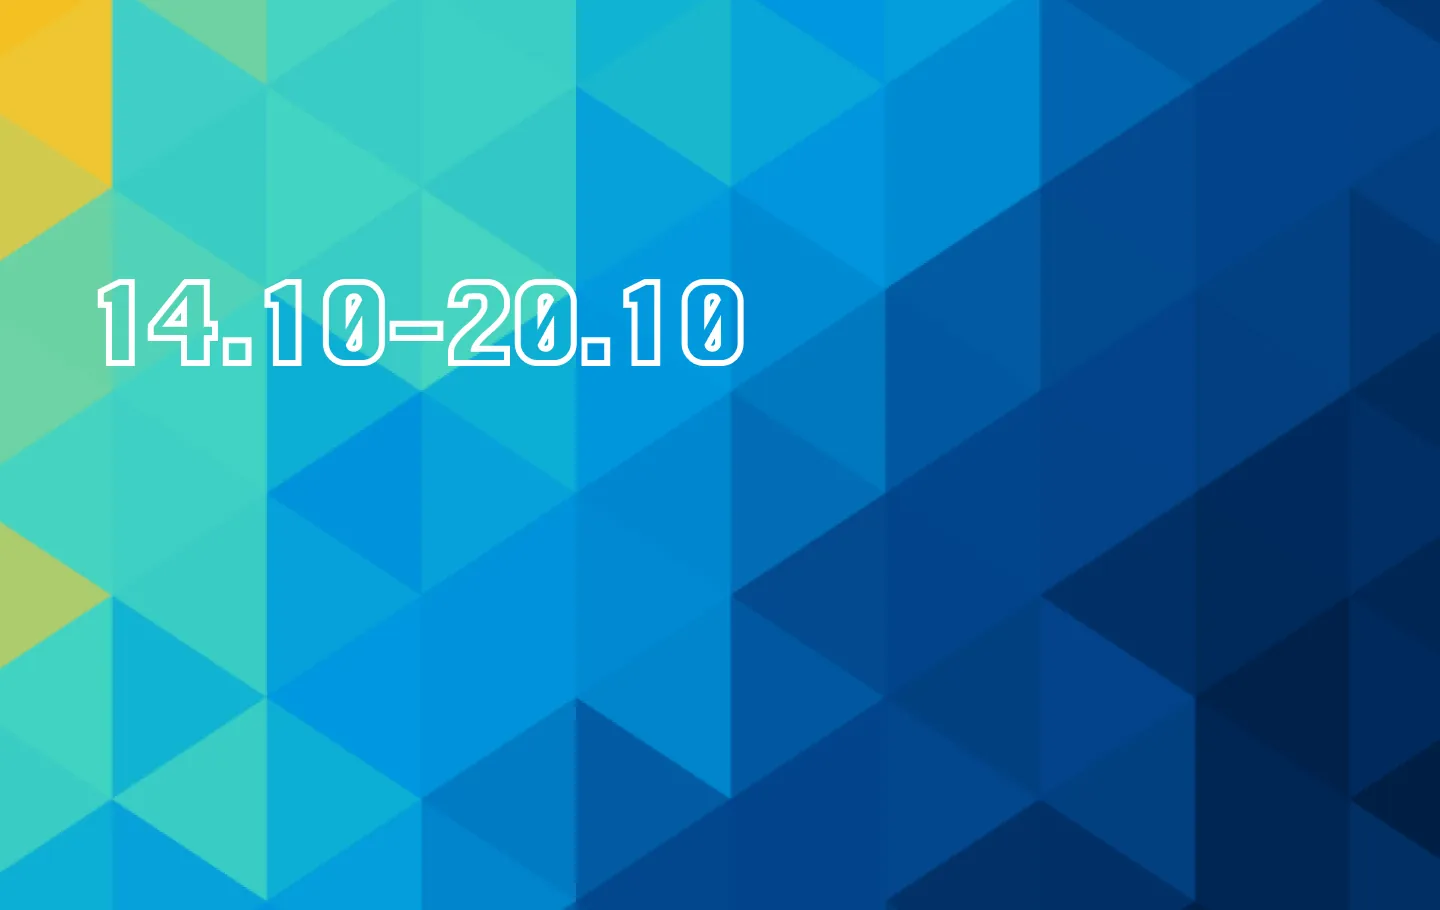 04.10-20.10. date on a blue background